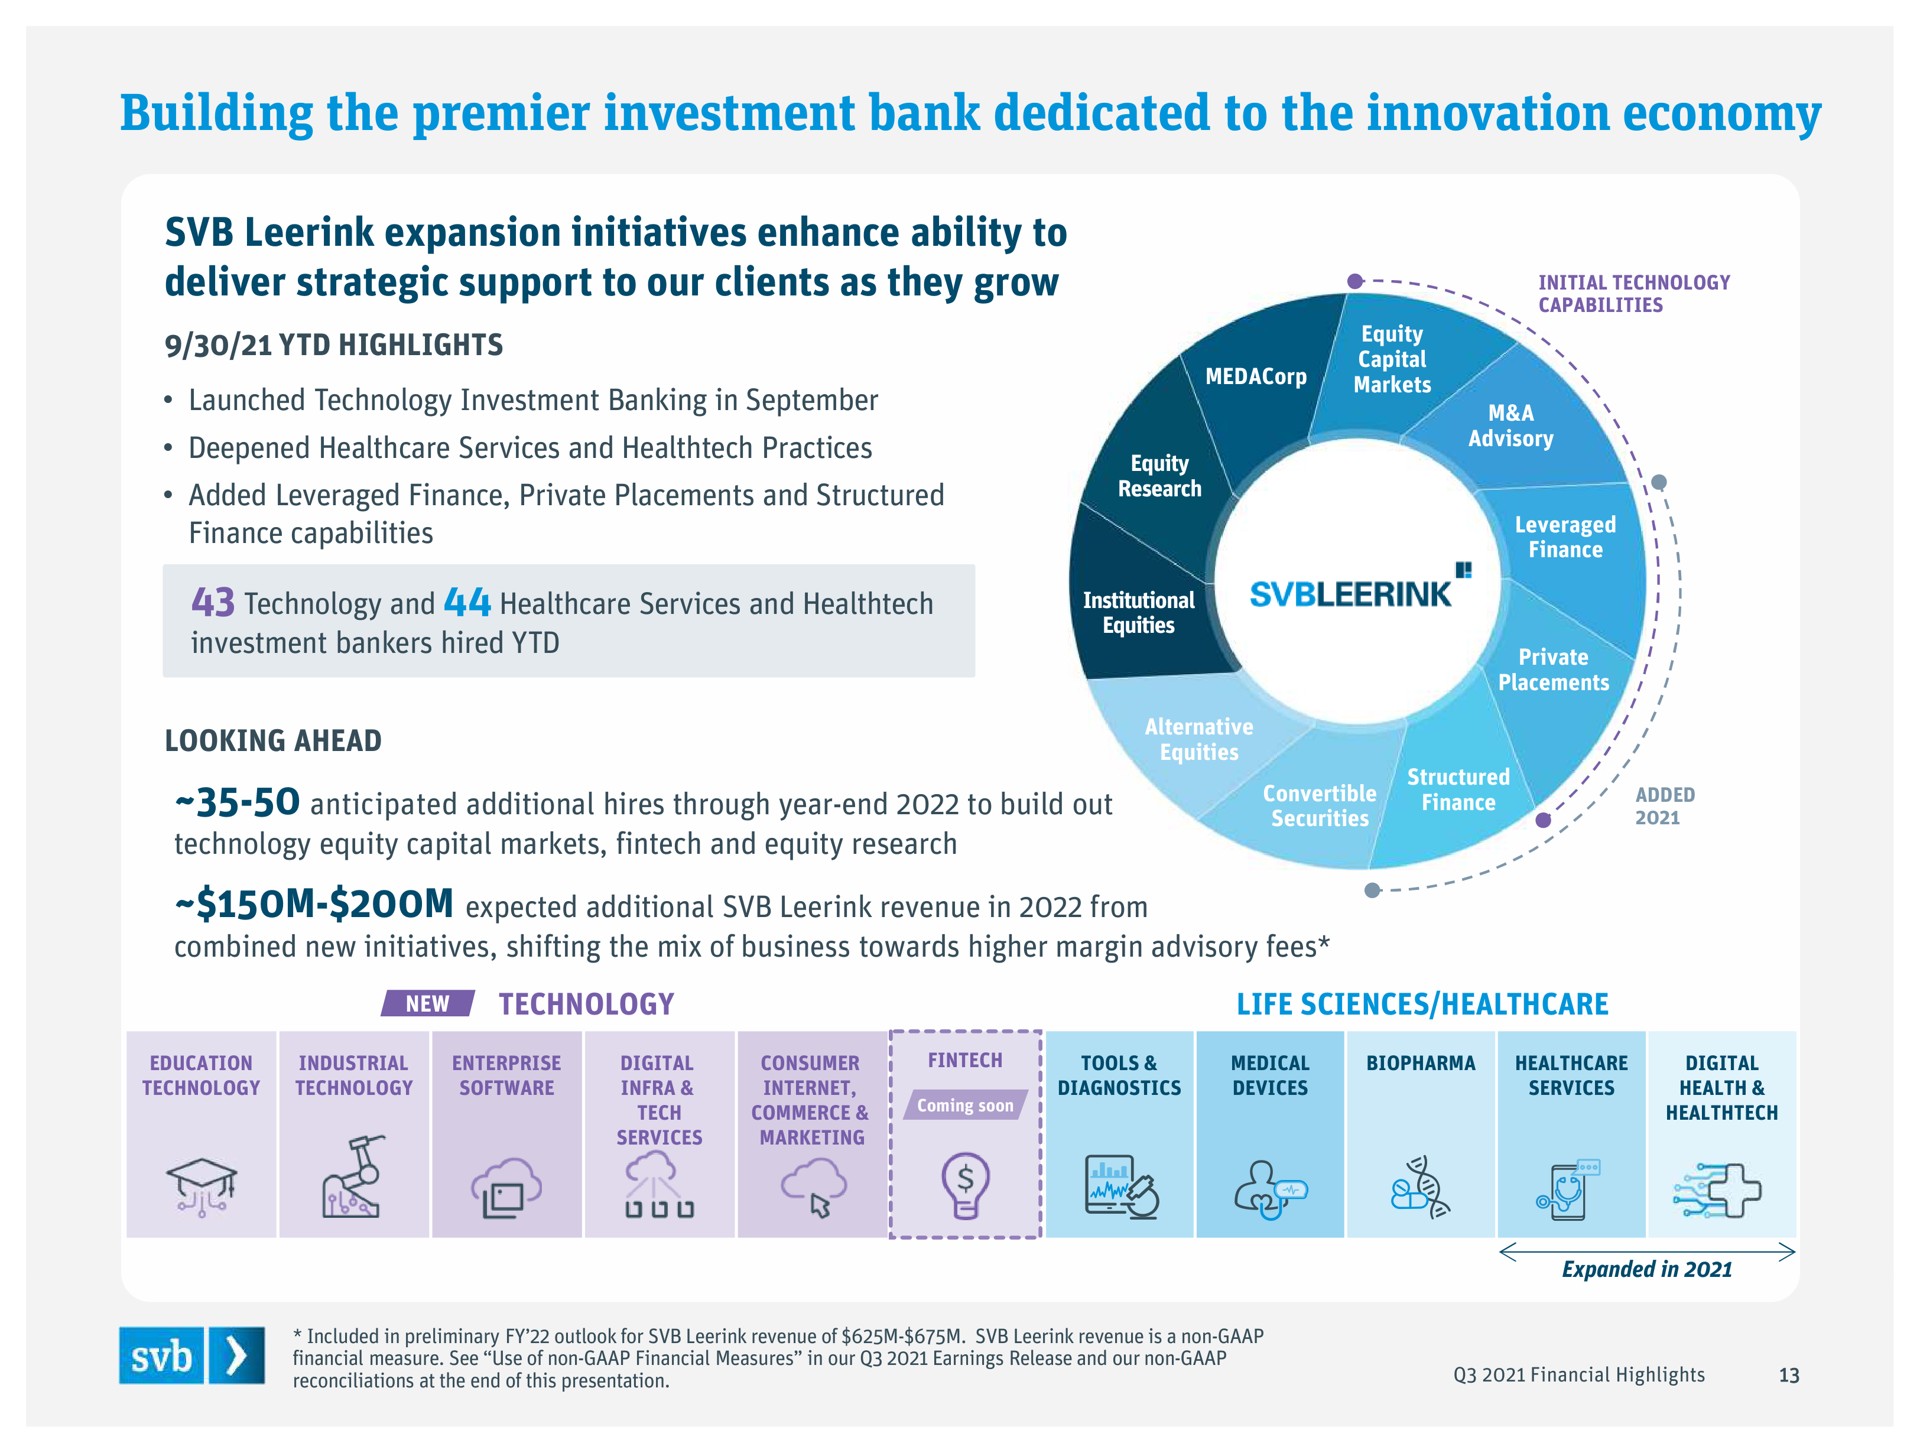 building the premier investment bank dedicated to the innovation economy highlights | Silicon Valley Bank